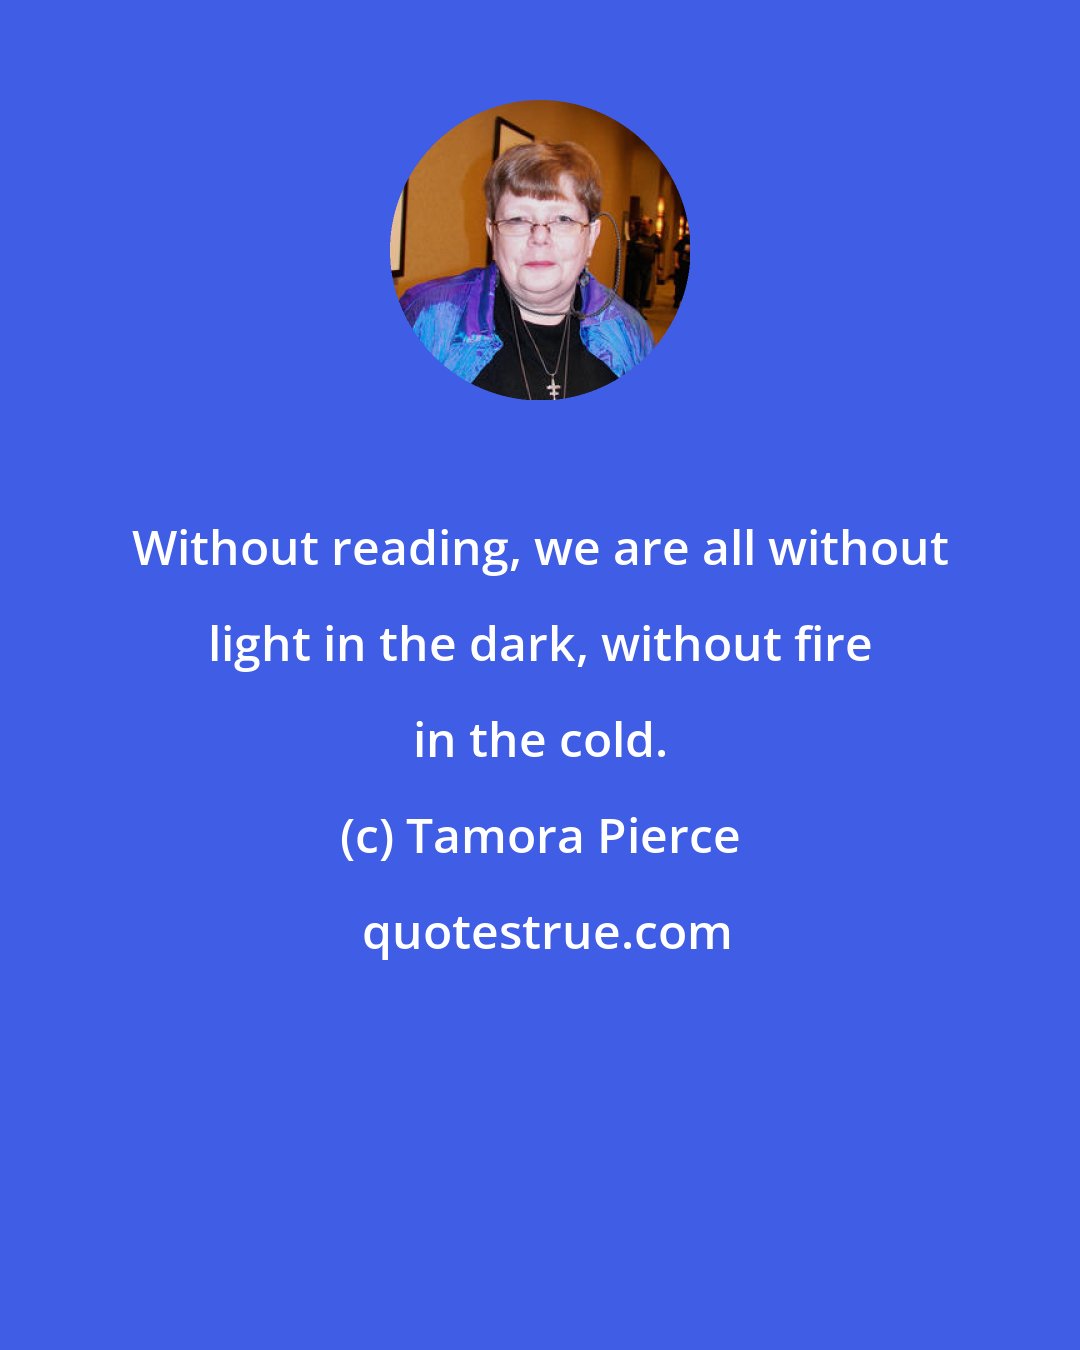 Tamora Pierce: Without reading, we are all without light in the dark, without fire in the cold.